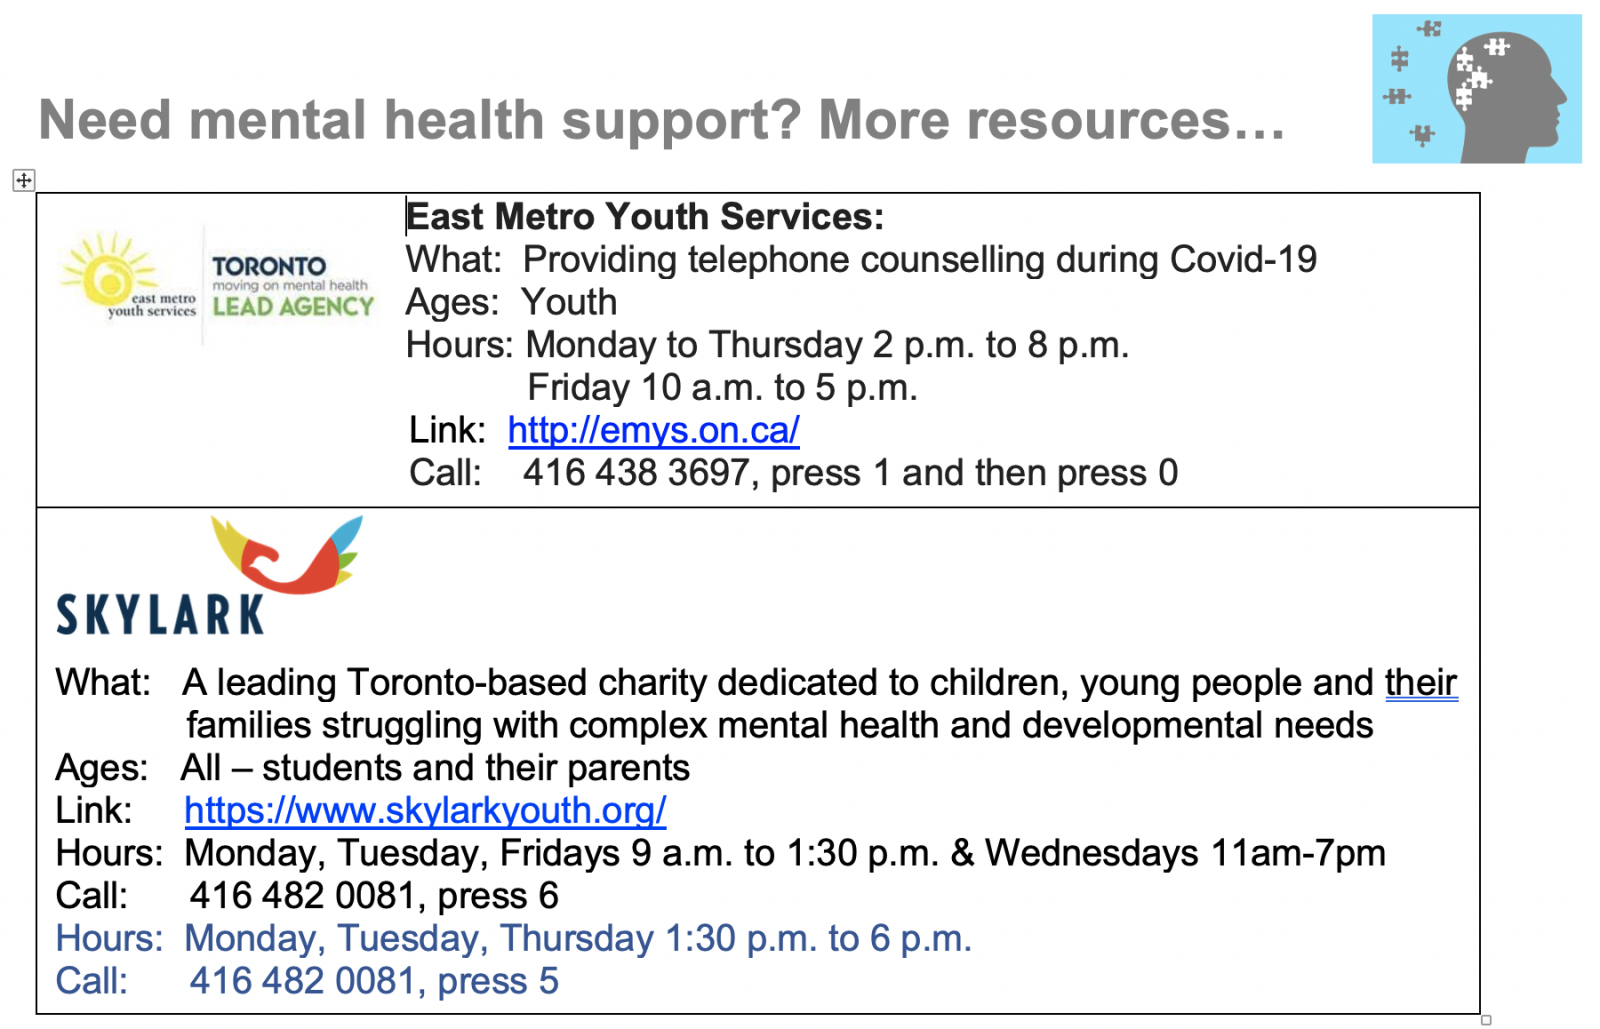 Graphic Image of additional mental health resources